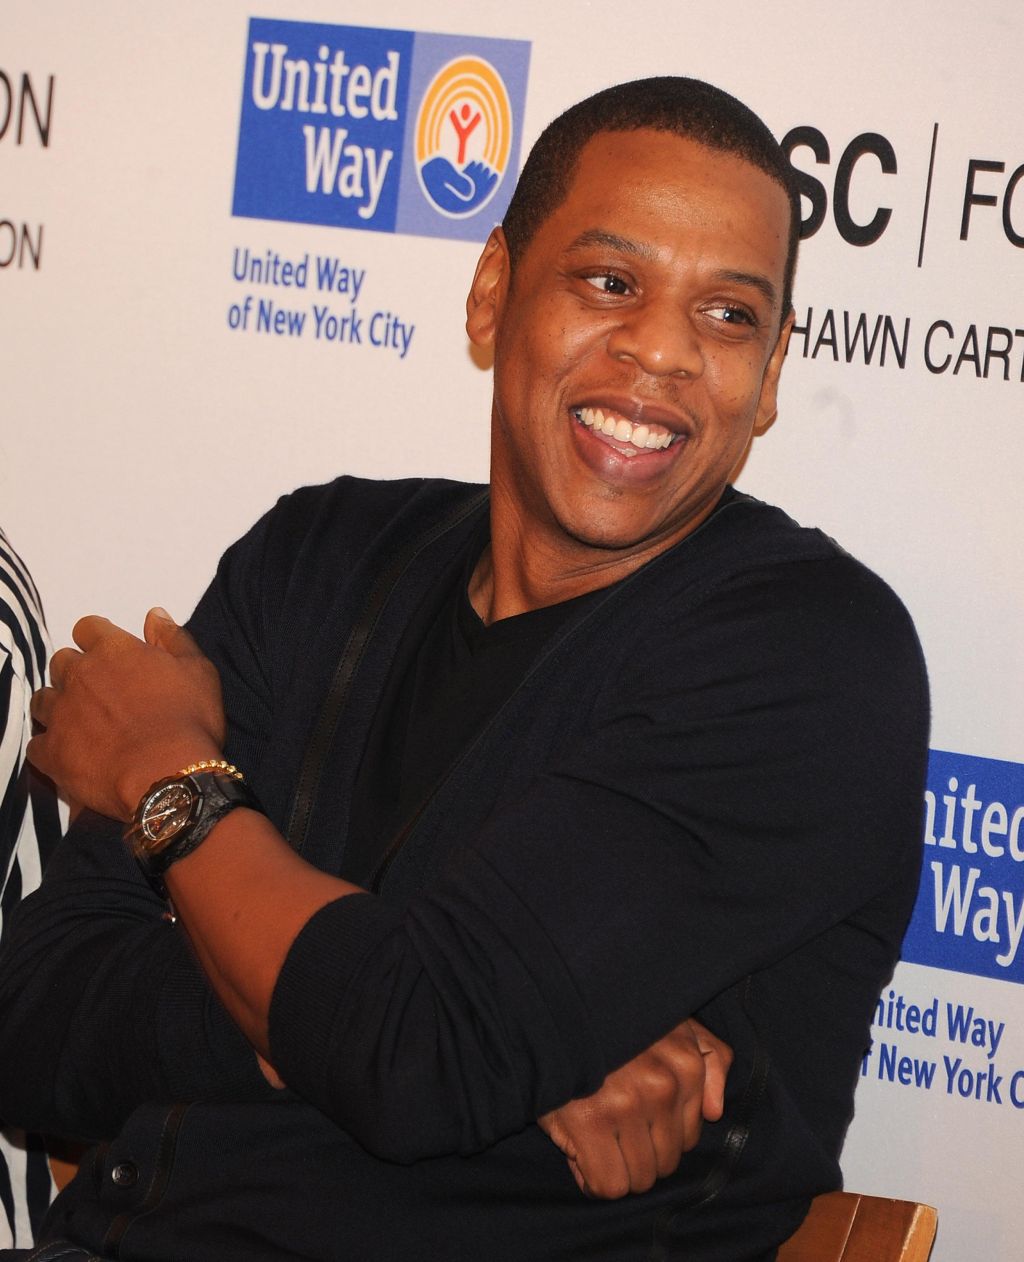 United Way Of New York City And The Shawn Carter Scholarship Foundation Announce 2 Jay Z Carnegie Hall Performances